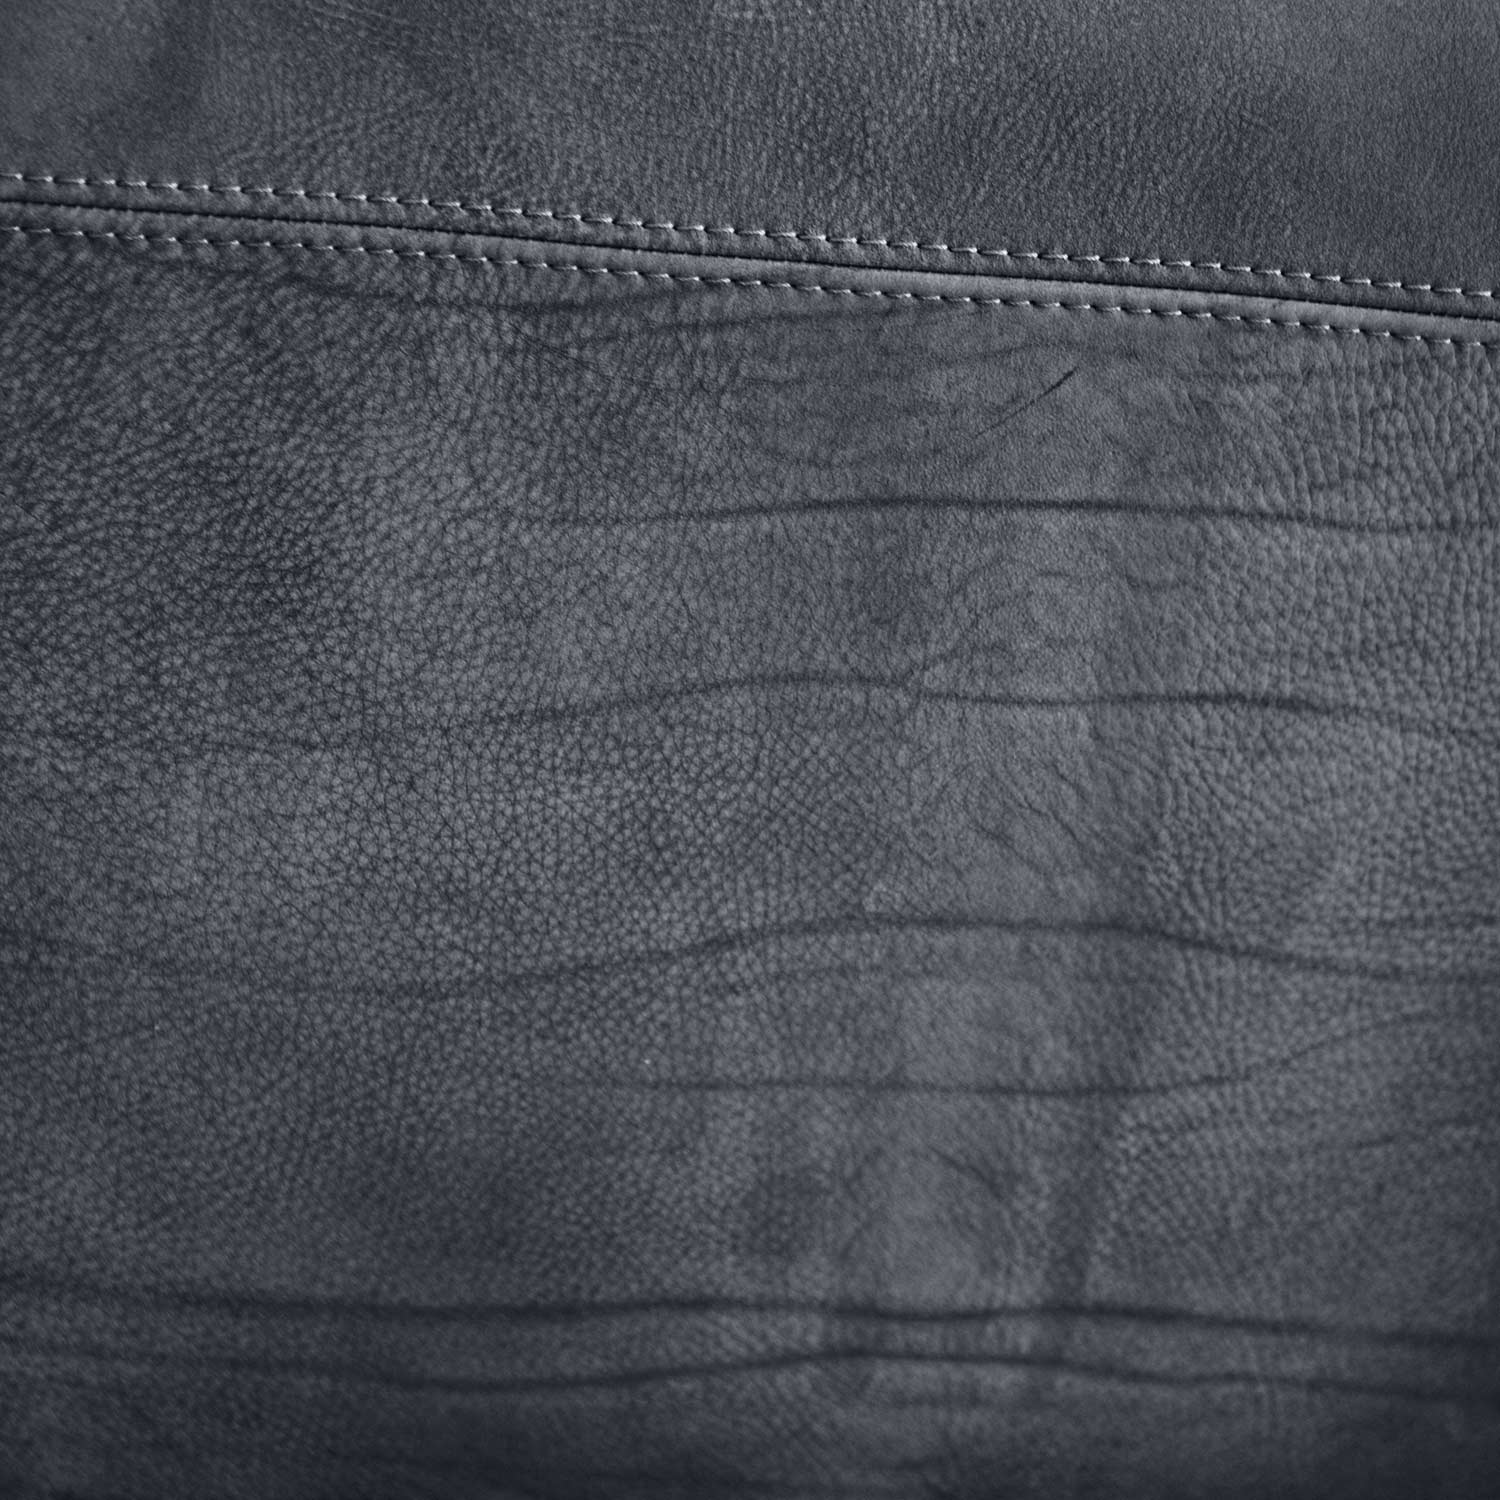 stitching detail on leather armchair